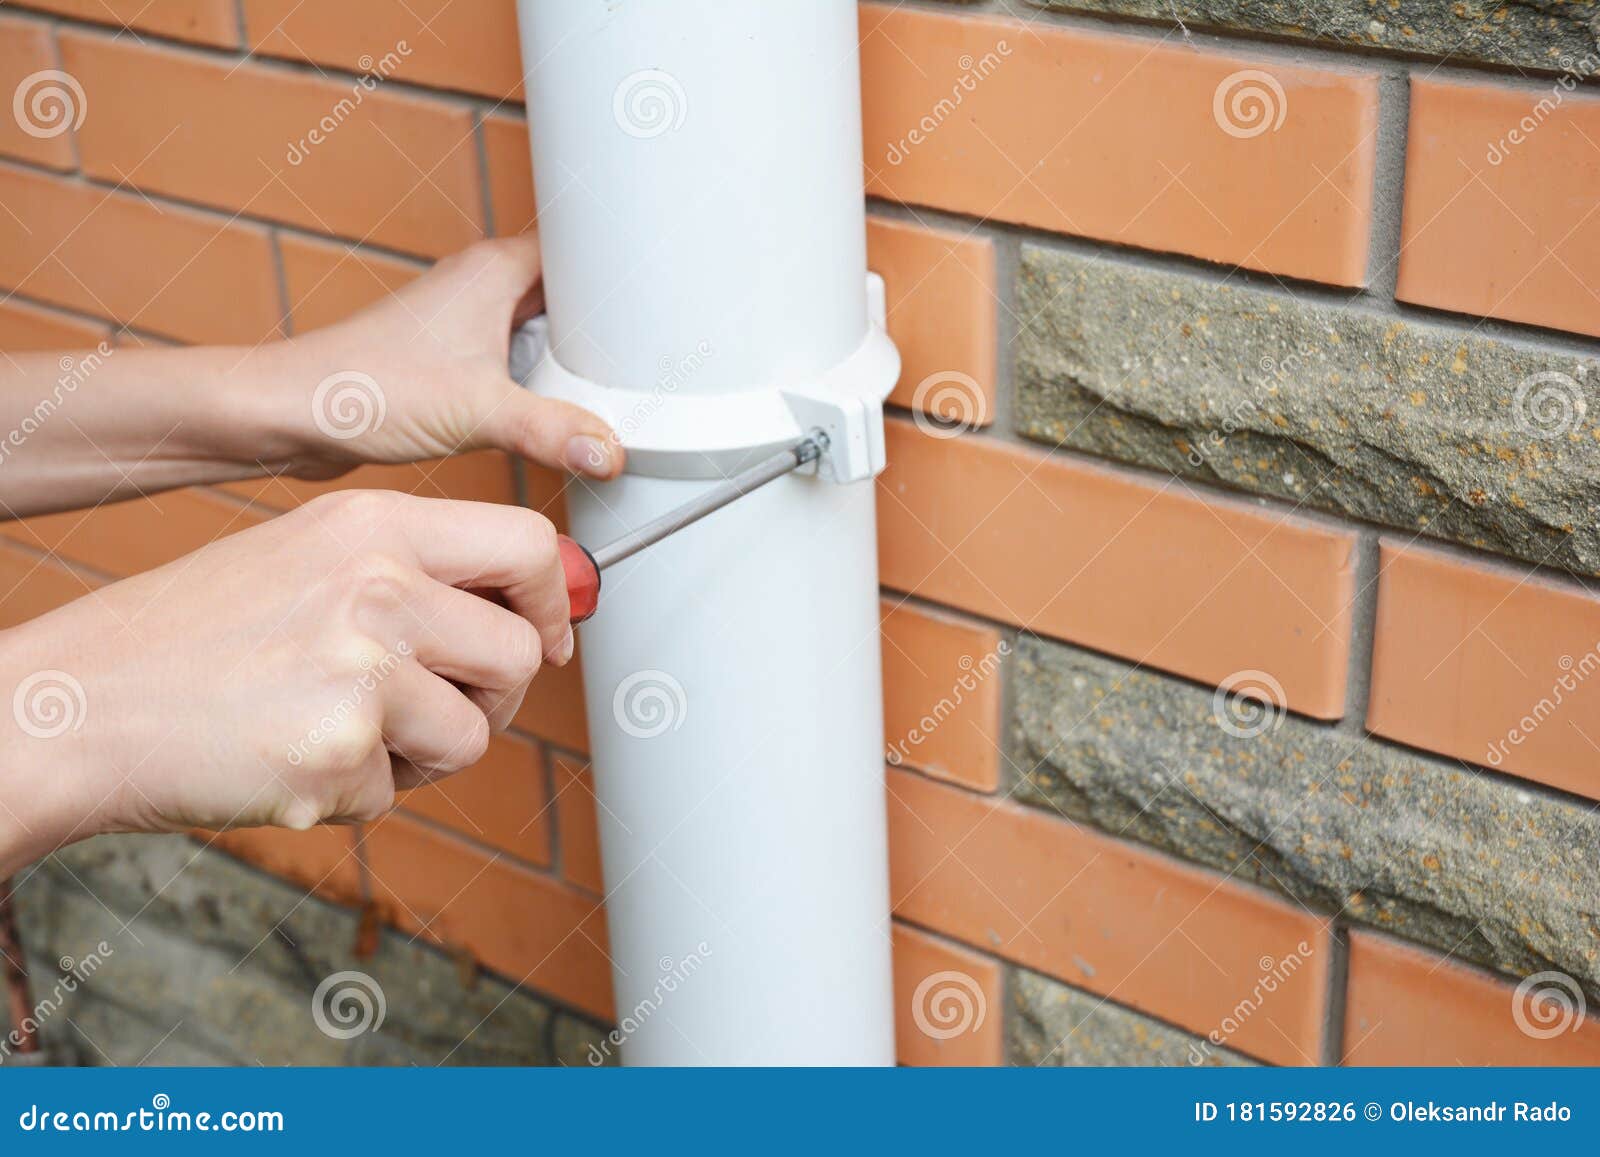 rain gutter installation: a man is screwing the downpipe bracket, socket clip with a screwdriver to fix the downspout to the wall